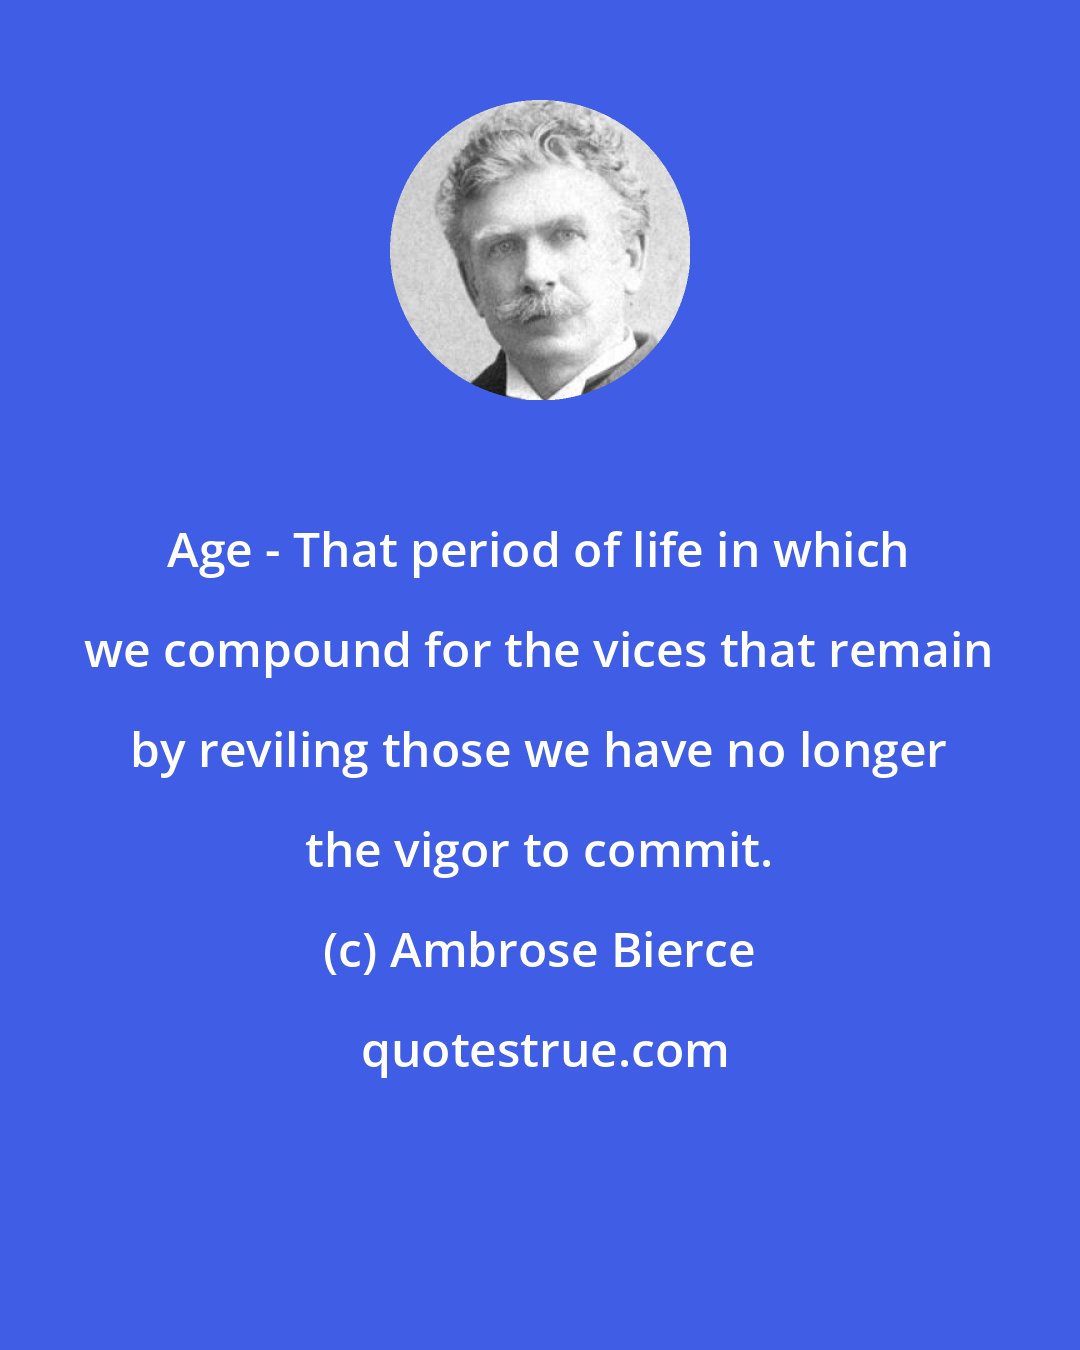 Ambrose Bierce: Age - That period of life in which we compound for the vices that remain by reviling those we have no longer the vigor to commit.